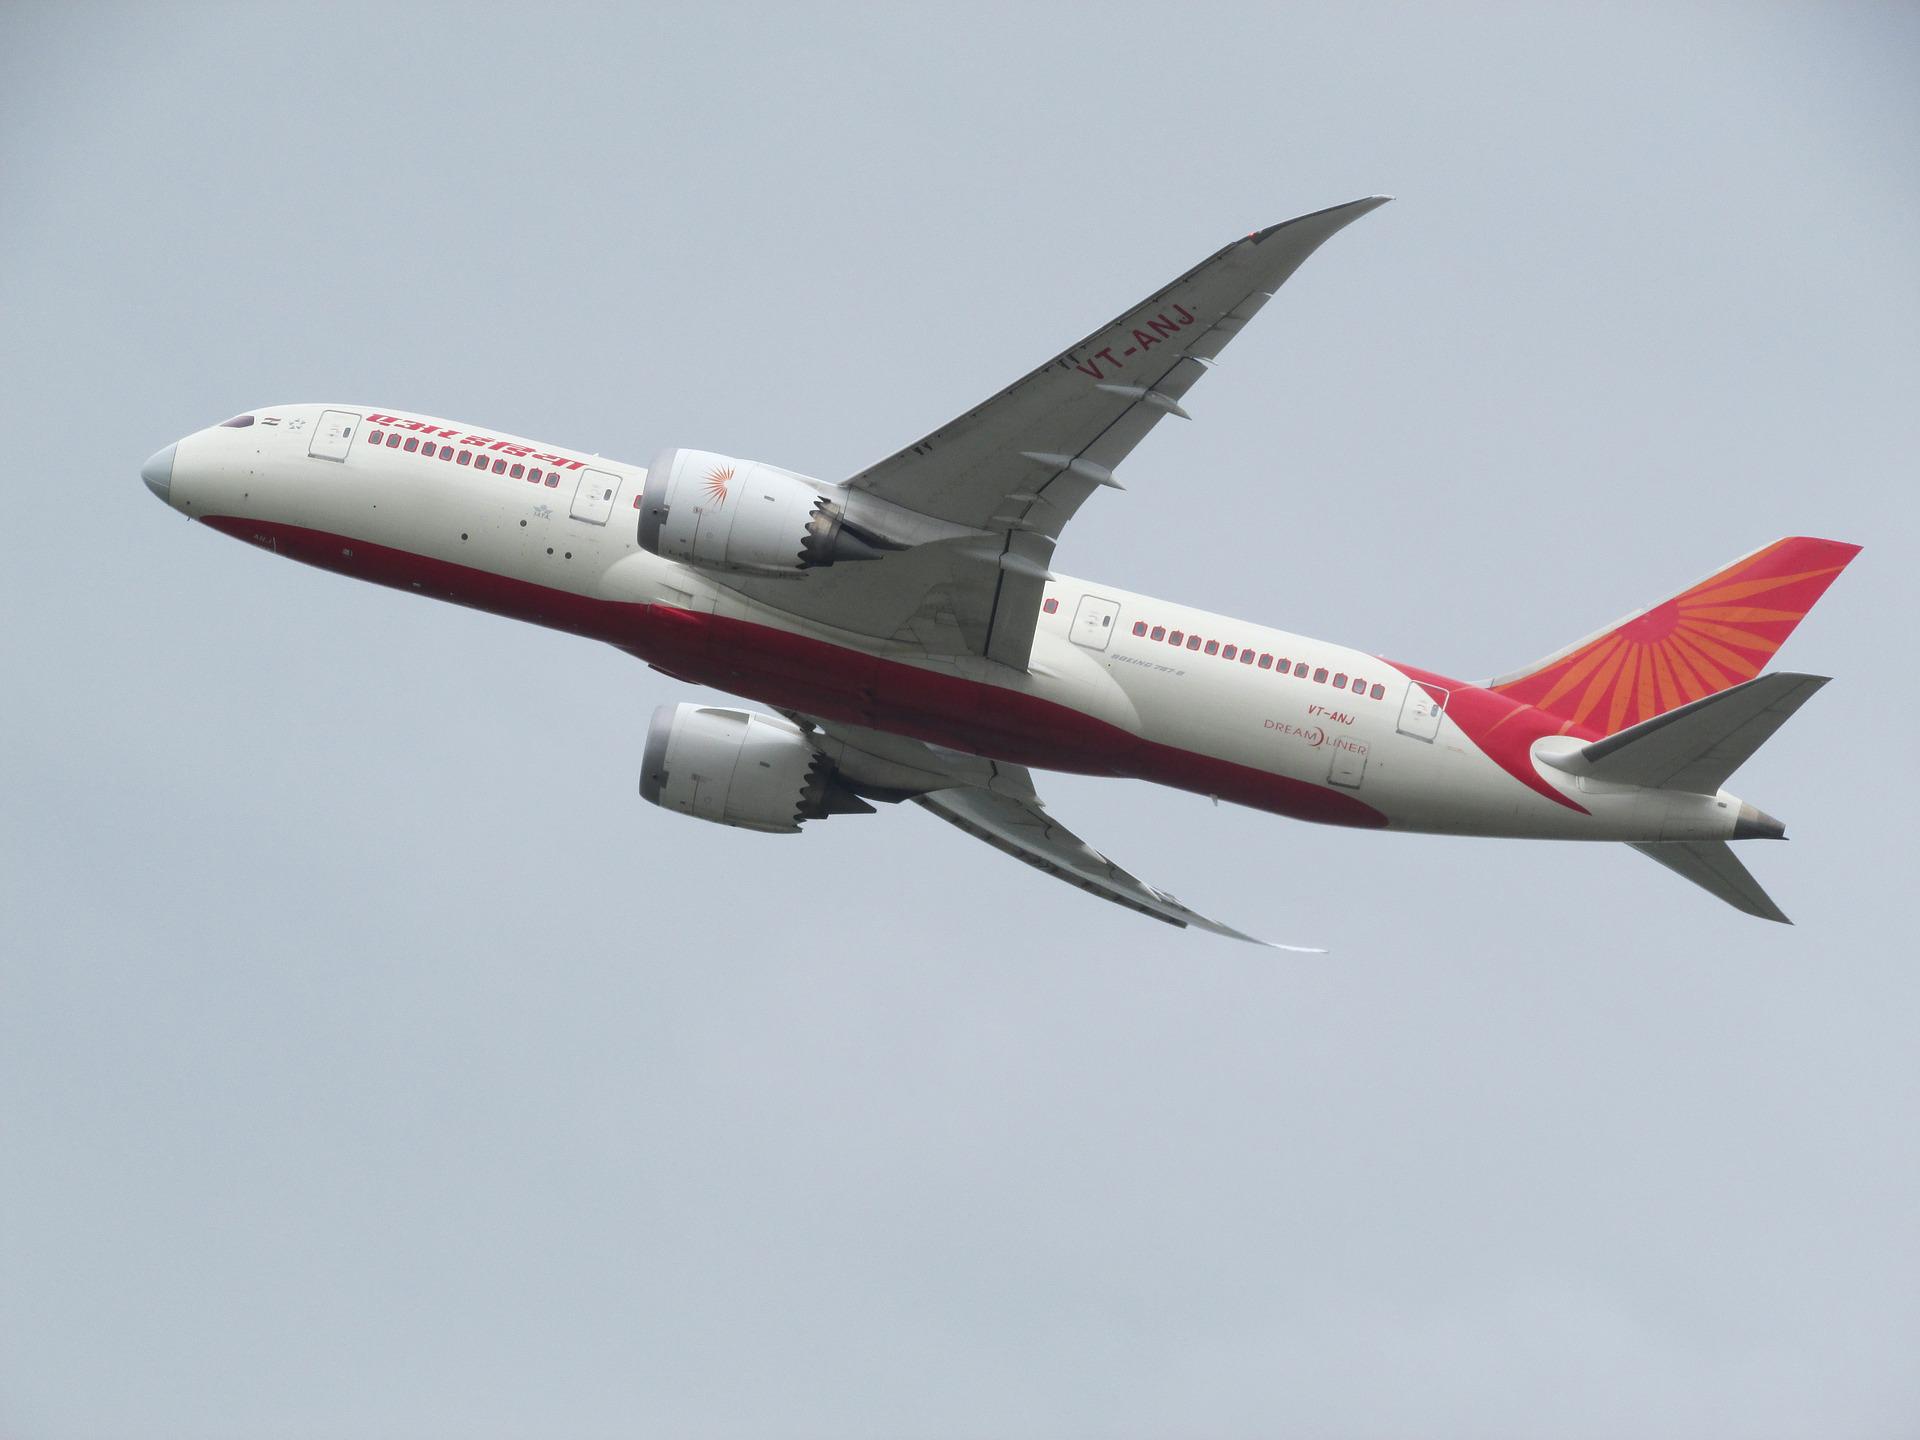 India's aviation history's first airline's (Air India) aircraft taking off in a grey sky.